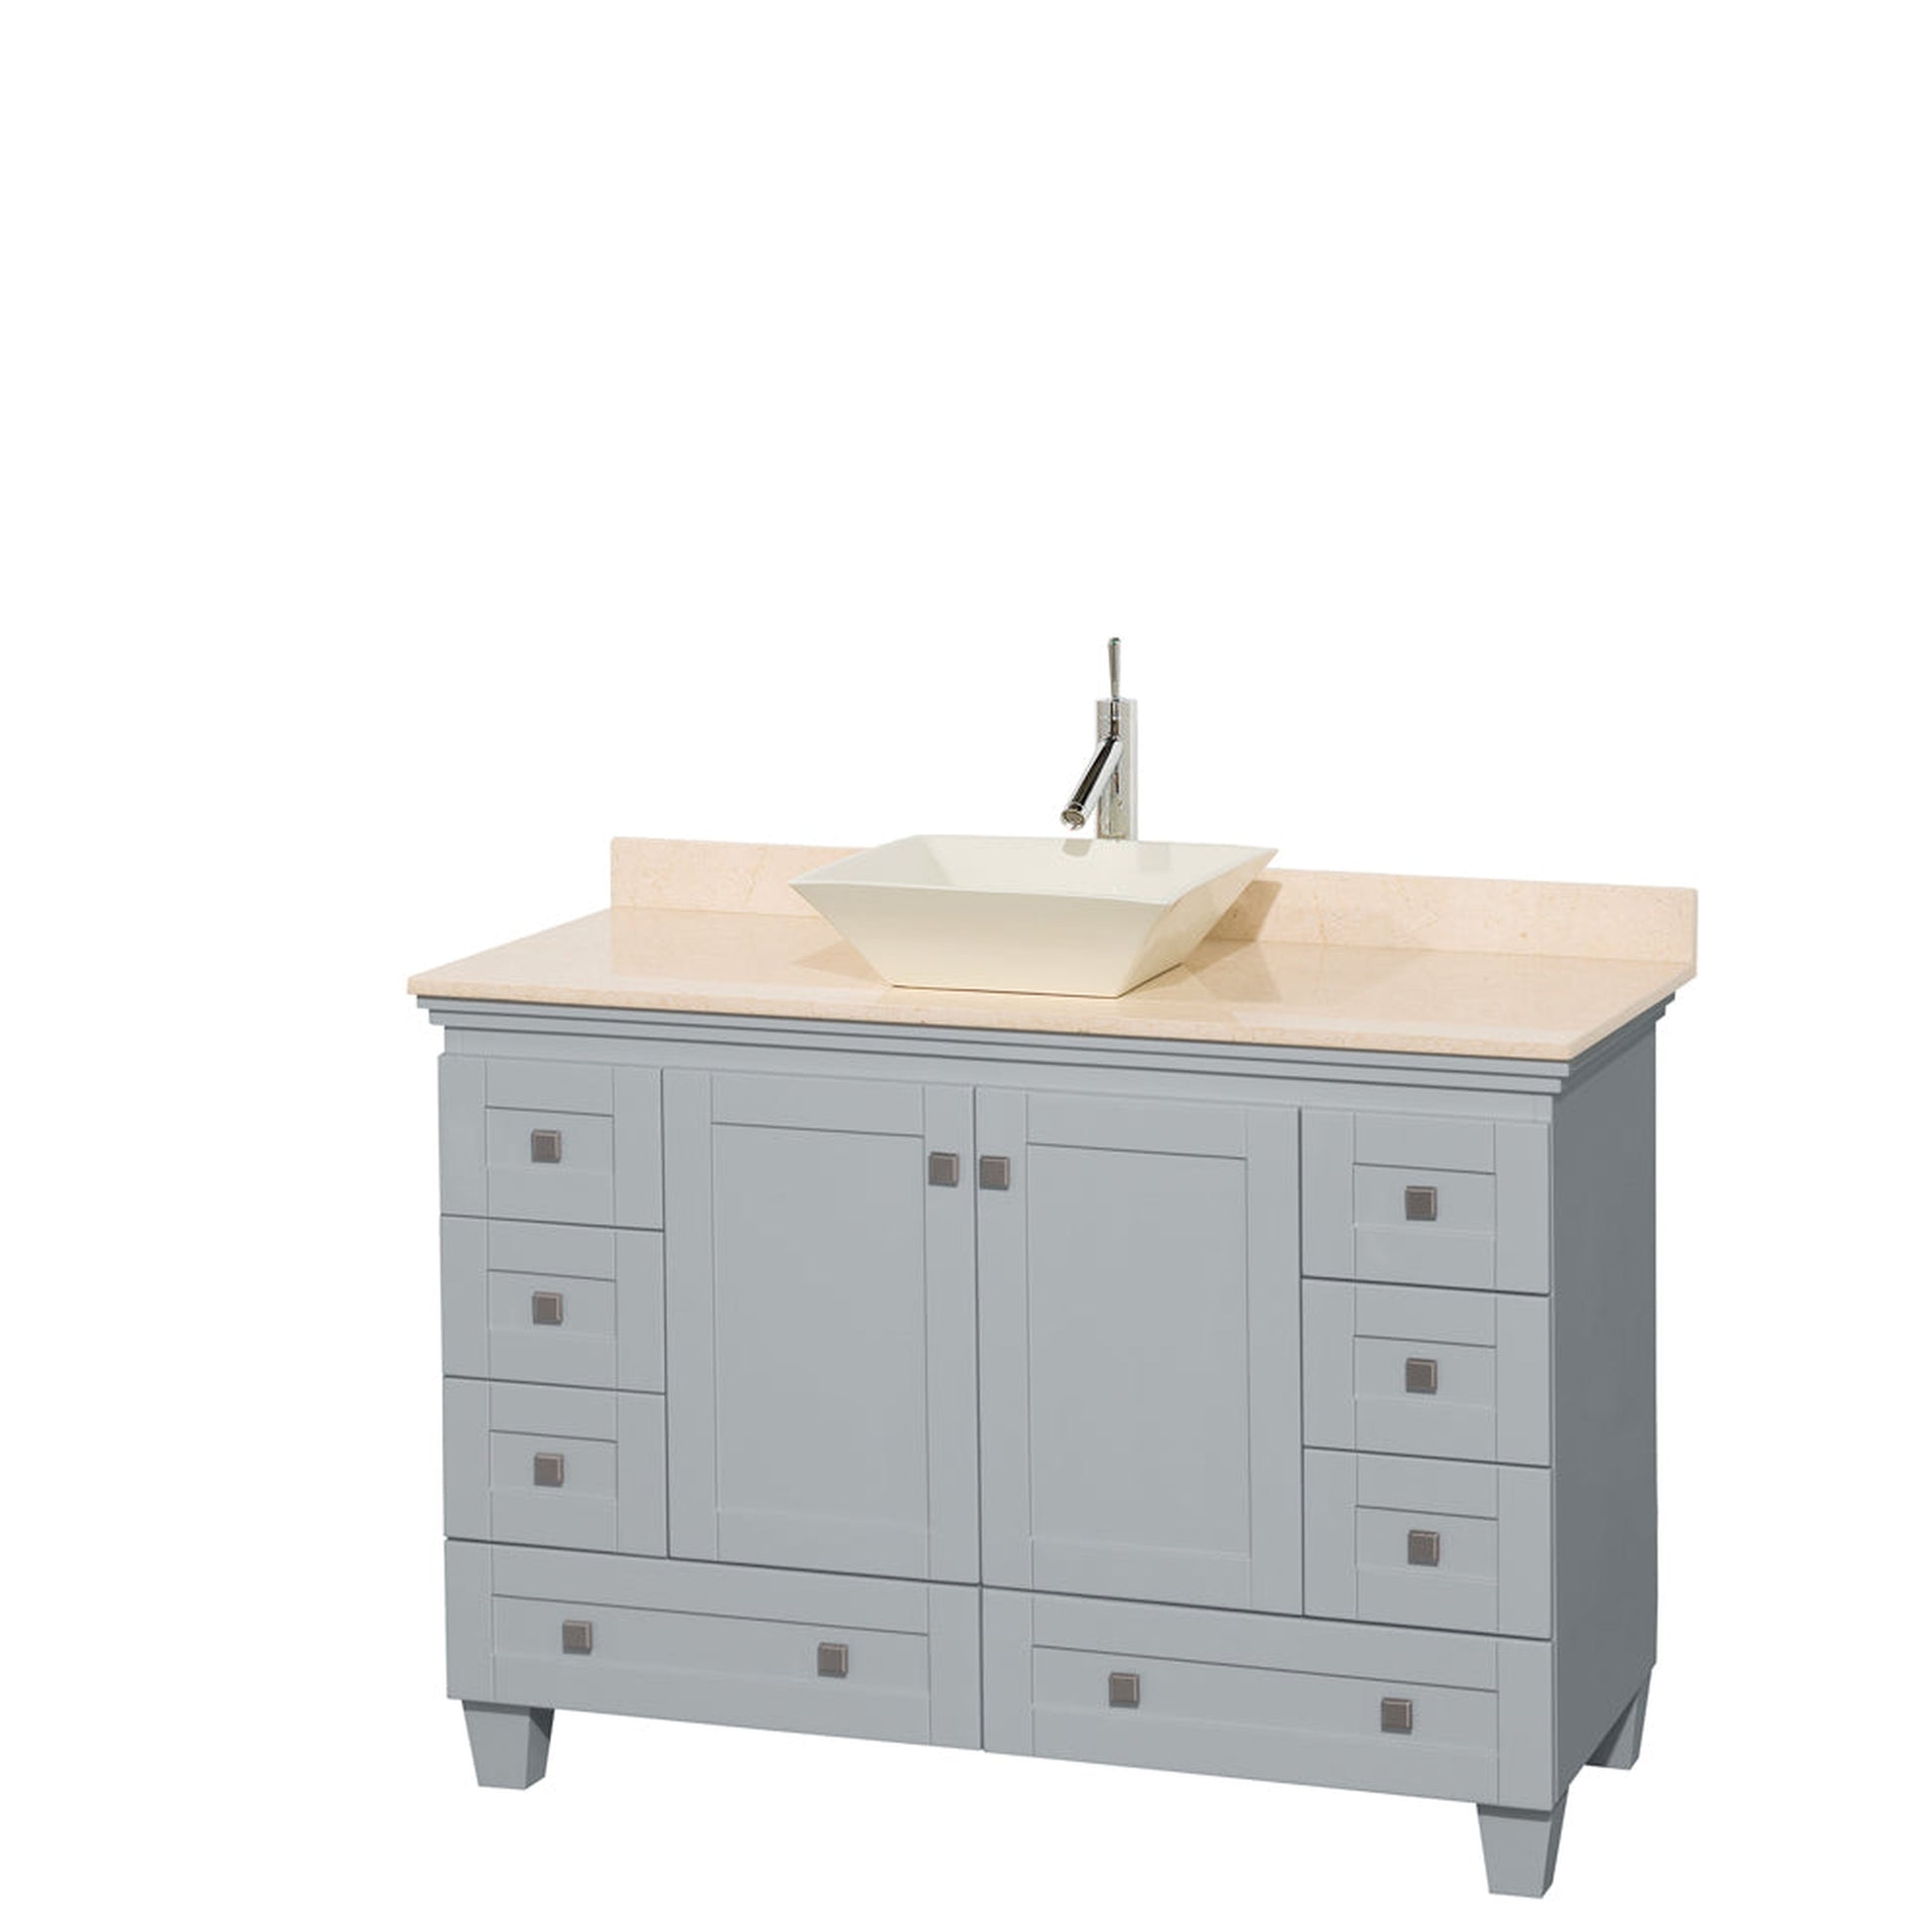 Wyndham Collection Acclaim 48" Single Bathroom Vanity in Oyster Gray With Ivory Marble Countertop & Pyra Bone Porcelain Sink